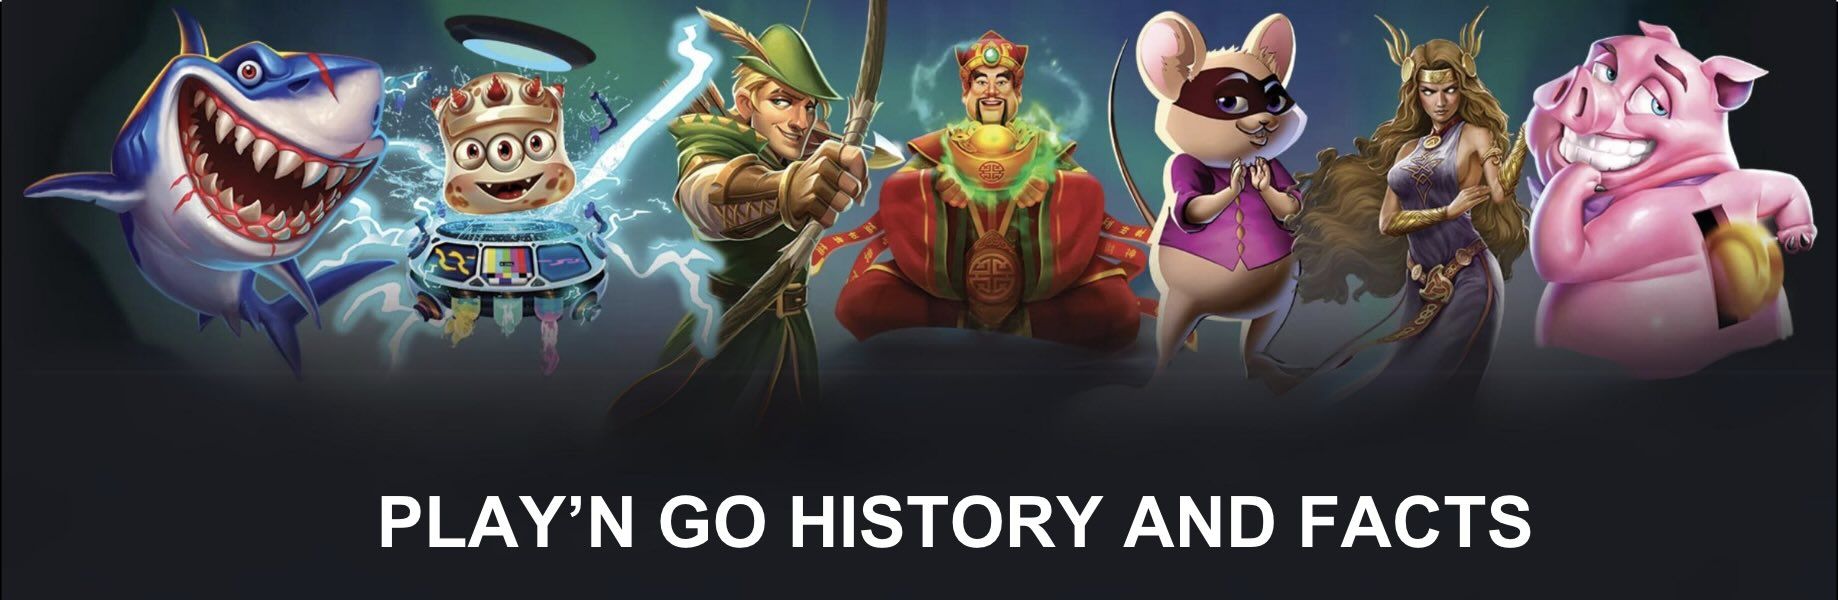 Image of Play'n GO History and Facts